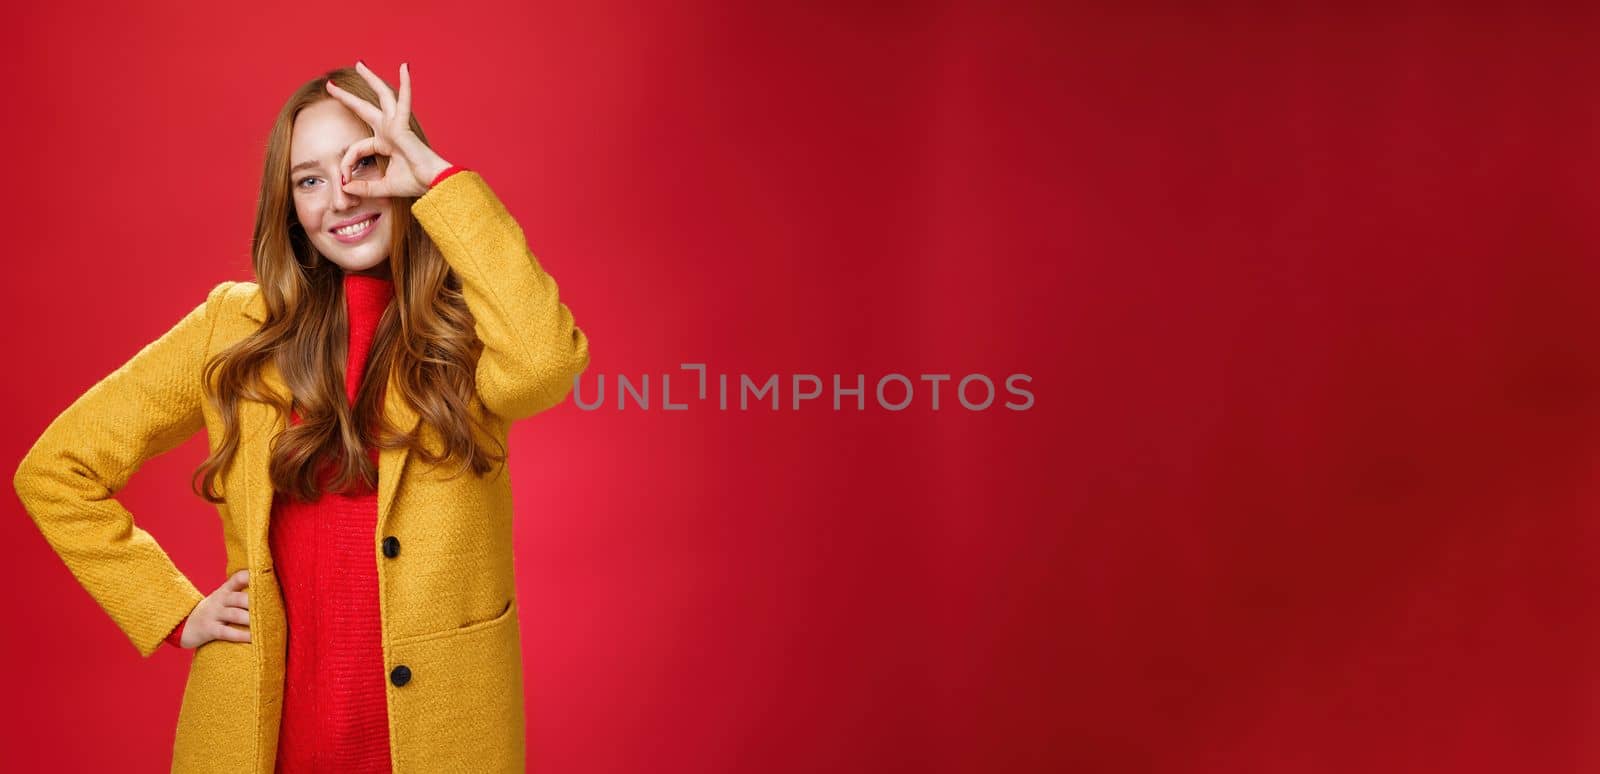 Bright and sunny girl feeling happy even on rainy days standing in yellow stylish coat over red background showing okay gesture over eye, smiling broadly at camera, holding hand on waist.